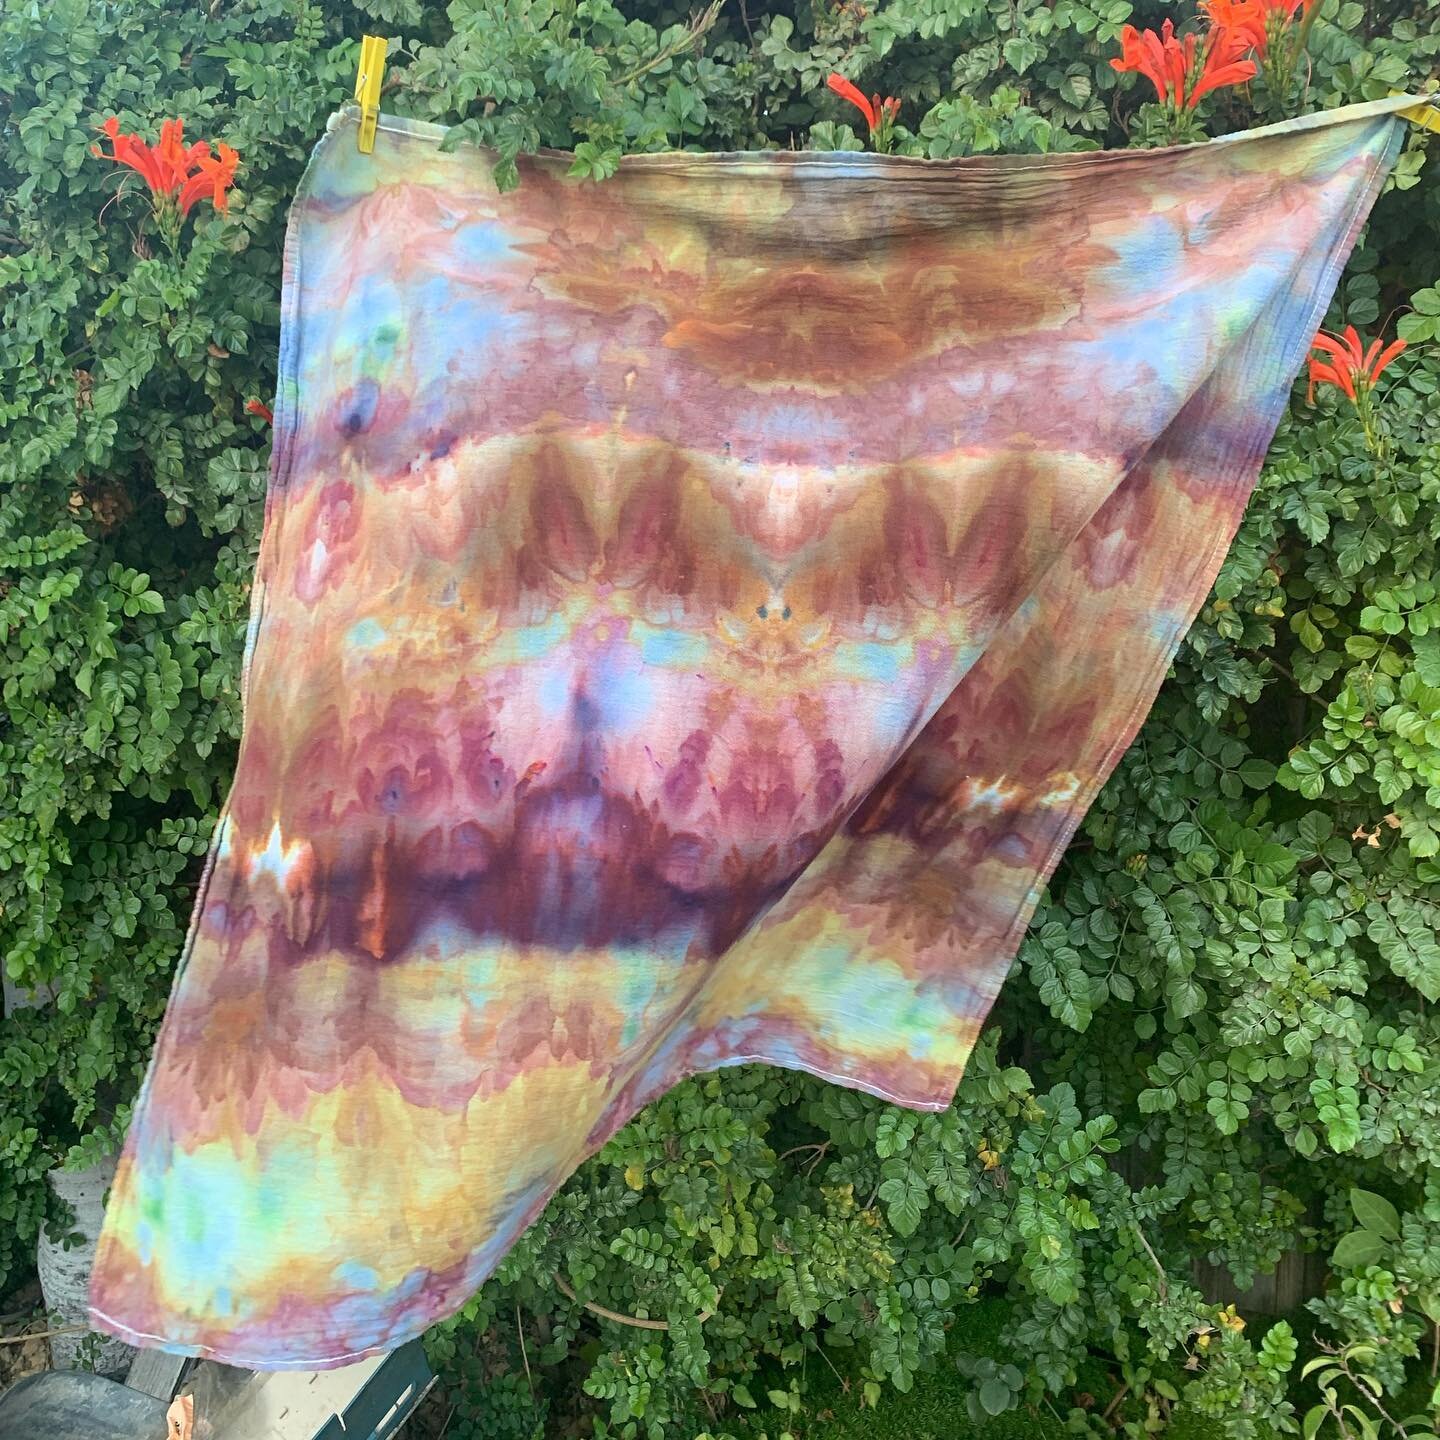 *ɴᴇᴡ* #gemstone inspired color-way! each one is 100% unique. 

Reusable flour sack tea towel, 100% cotton, 31 in. x 31 in., super absorbent. ✨

1 for $25
2 for $40
(🛸shipping included)

ᴅᴍ ғᴏʀ ᴍᴏʀᴇ ɪɴғᴏ ᴏʀ ᴛᴏ ᴏʀᴅᴇʀ.

💎💜💫 #futurefibers #icebathdye